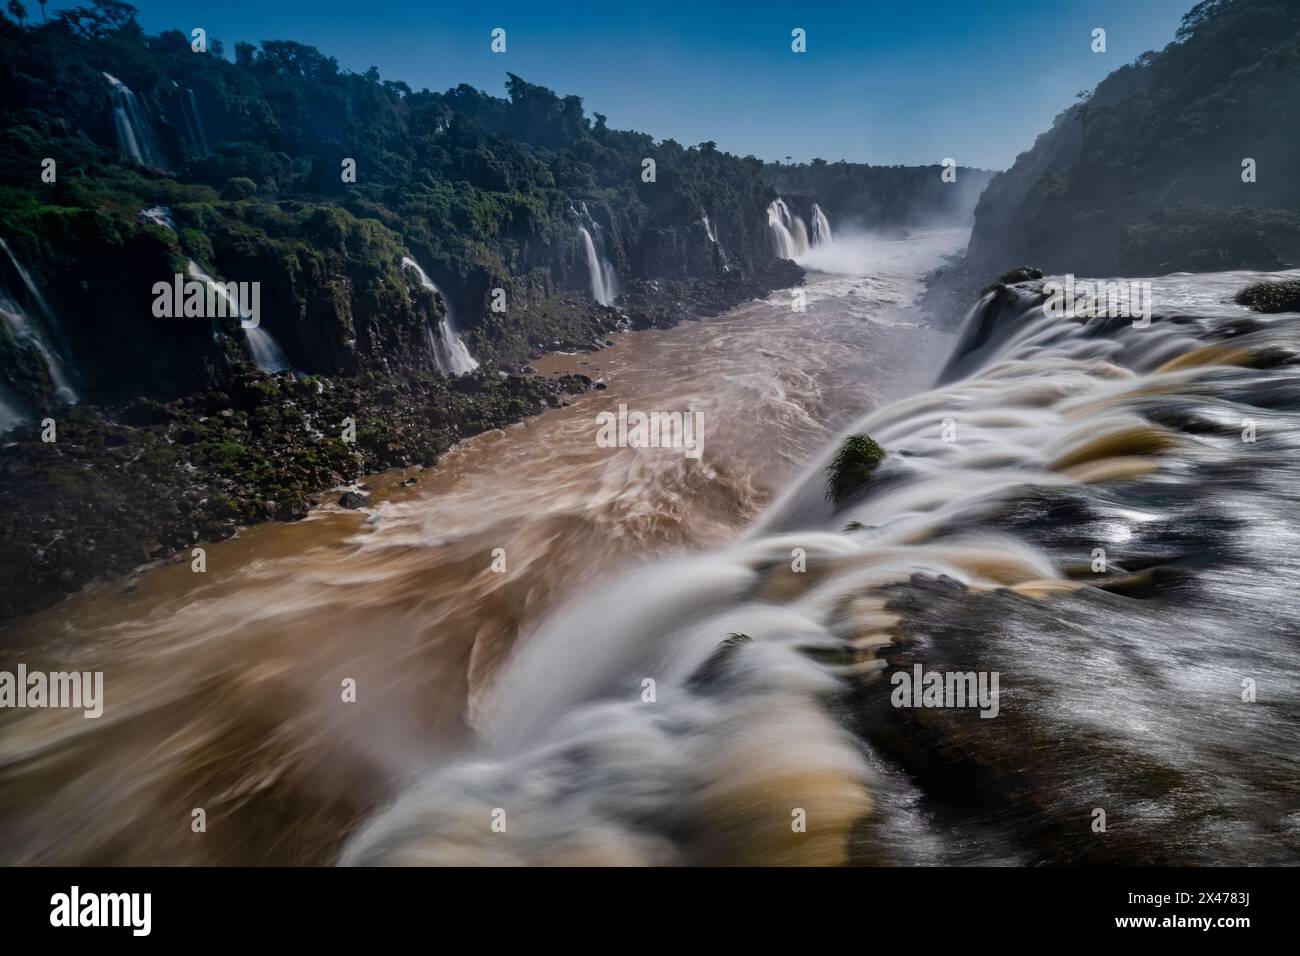 The Iguazú Falls are one of the world’s most awe-inspiring natural sights, with visitors spellbound by its vast scale, thunderous sound, and soaking s Stock Photo